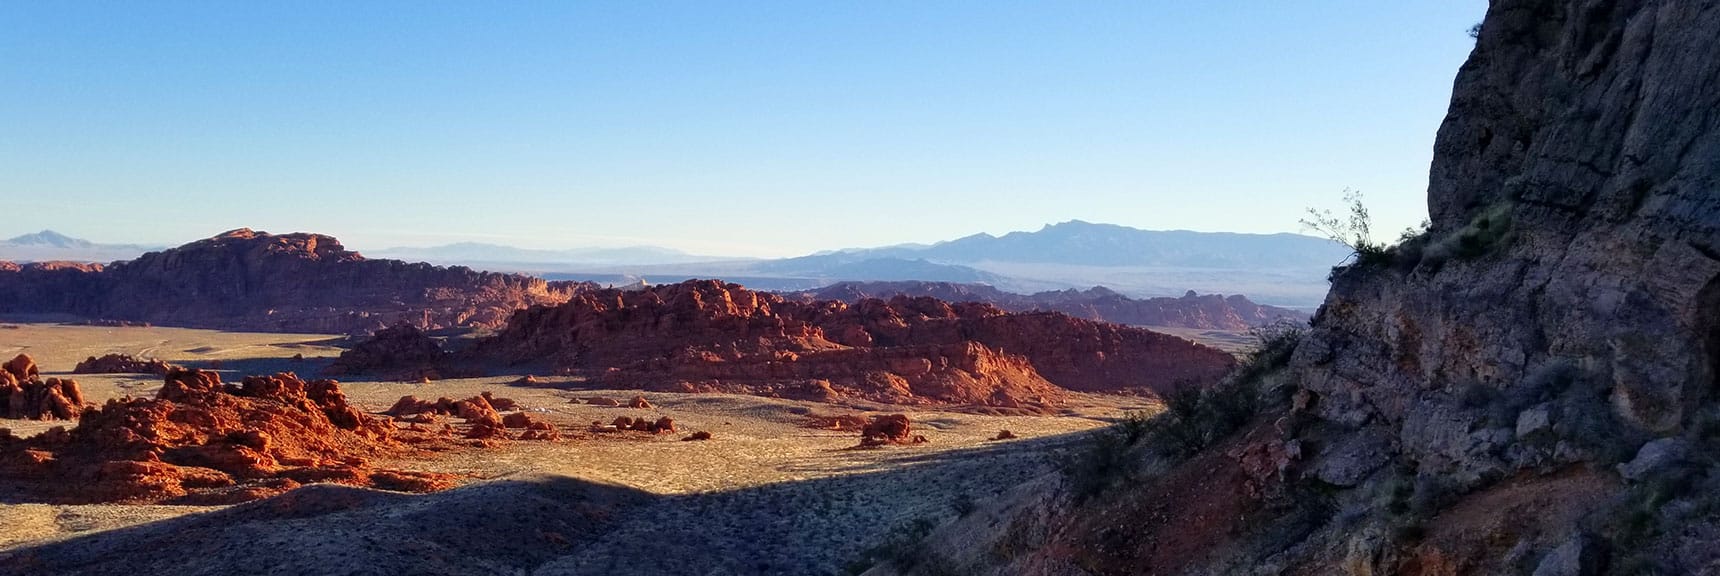 View Back Toward Valley of Fire State Park at Sunrise Before Entering the Muddy Mountains Wilderness, Nevada